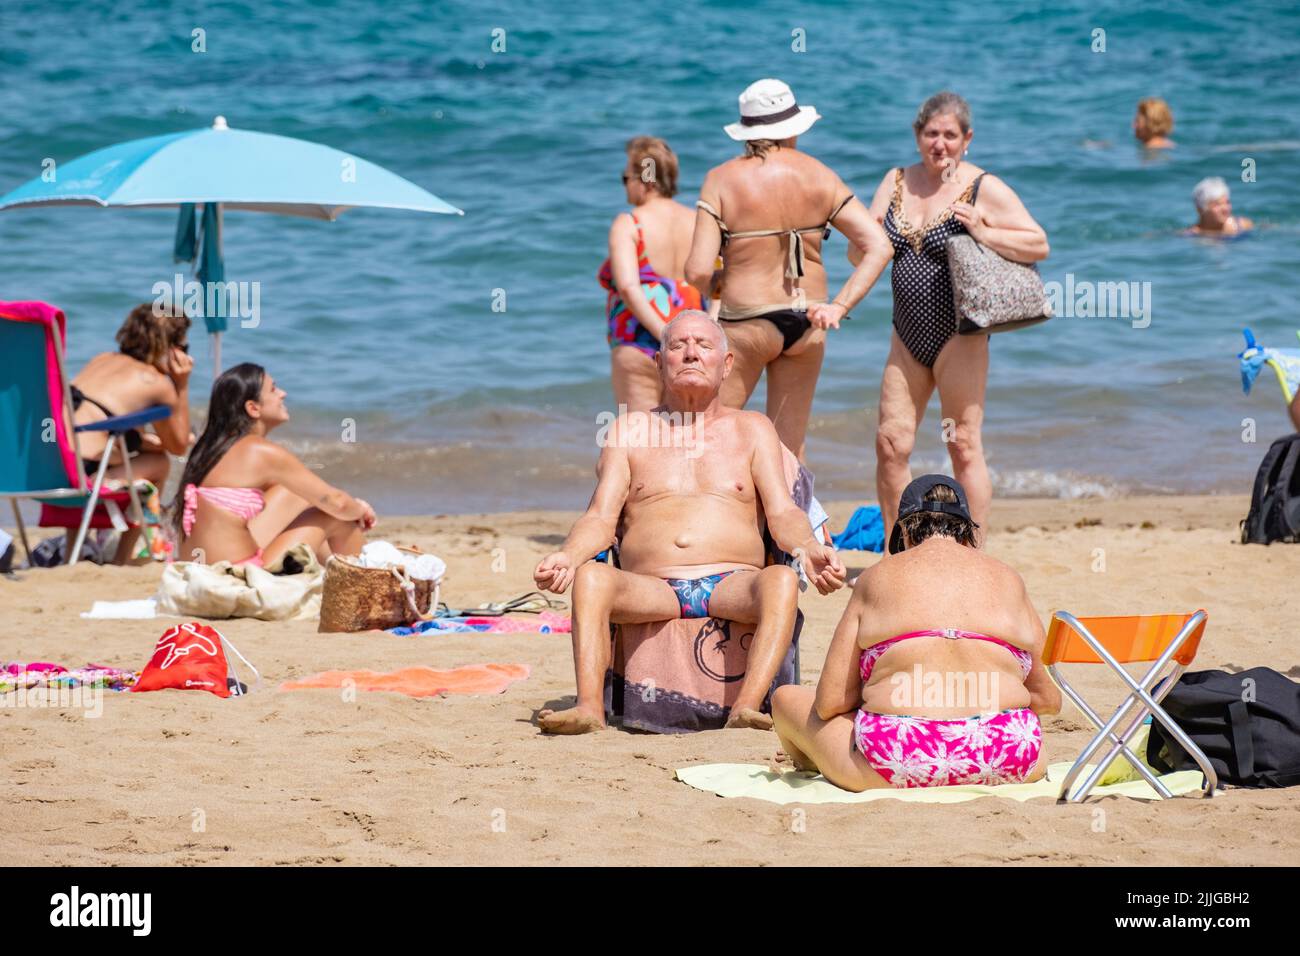 Las Palmas, Gran Canaria, Canary Islands, Spain. 26th July, 2022. Tourists, many from the UK, swelter on the city beach in Las Palmas during a heatwave on Gran Canaria. The south west of the island registered 45 degrees Celicius on Monday. Credit: Alan Dawson/ Alamy Live News. Stock Photo